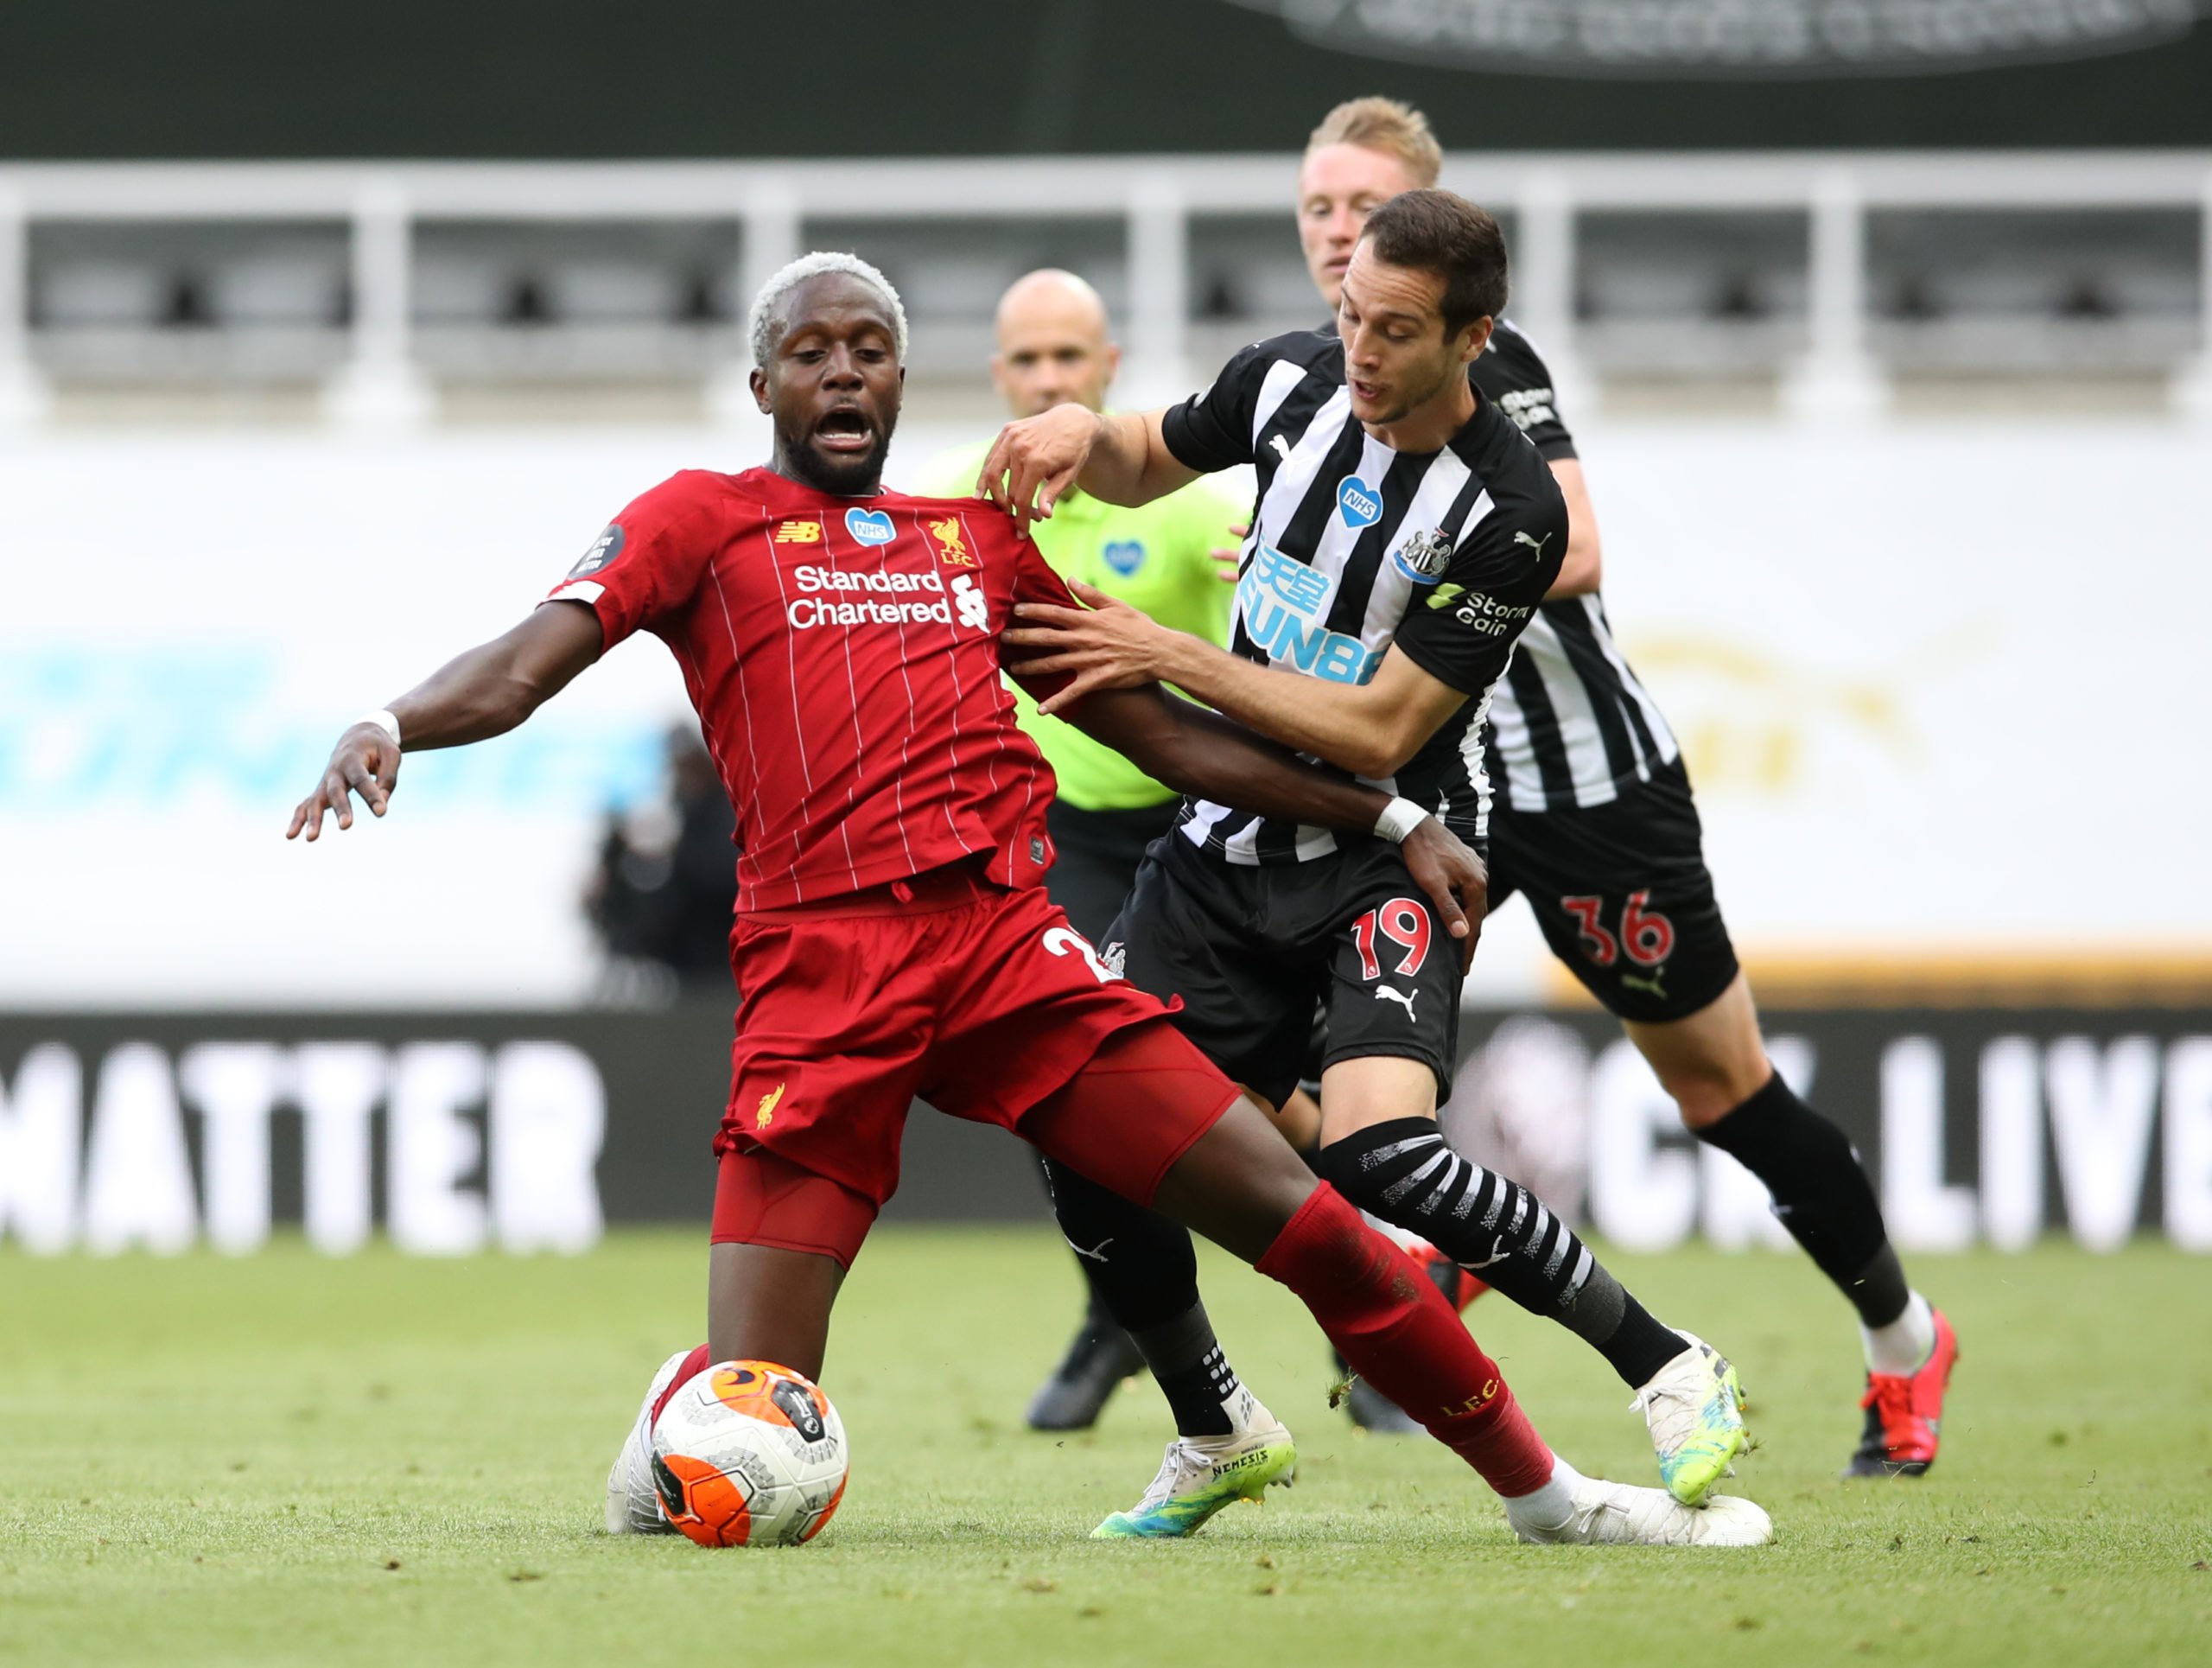 NEWCASTLE UPON TYNE, ENGLAND - JULY 26: Divock Origi of Liverpool  battles for possession with Javier Manquillo of Newcastle United  during the Premier League match between Newcastle United and Liverpool FC at St. James Park on July 26, 2020 in Newcastle upon Tyne, England. Football Stadiums around Europe remain empty due to the Coronavirus Pandemic as Government social distancing laws prohibit fans inside venues resulting in all fixtures being played behind closed doors. (Photo by Owen Humphreys/Pool via Getty Images)The 4th Official uses images provided by the following image agency: Getty Images (https://www.gettyimages.de/) Imago Images (https://www.imago-images.de/)